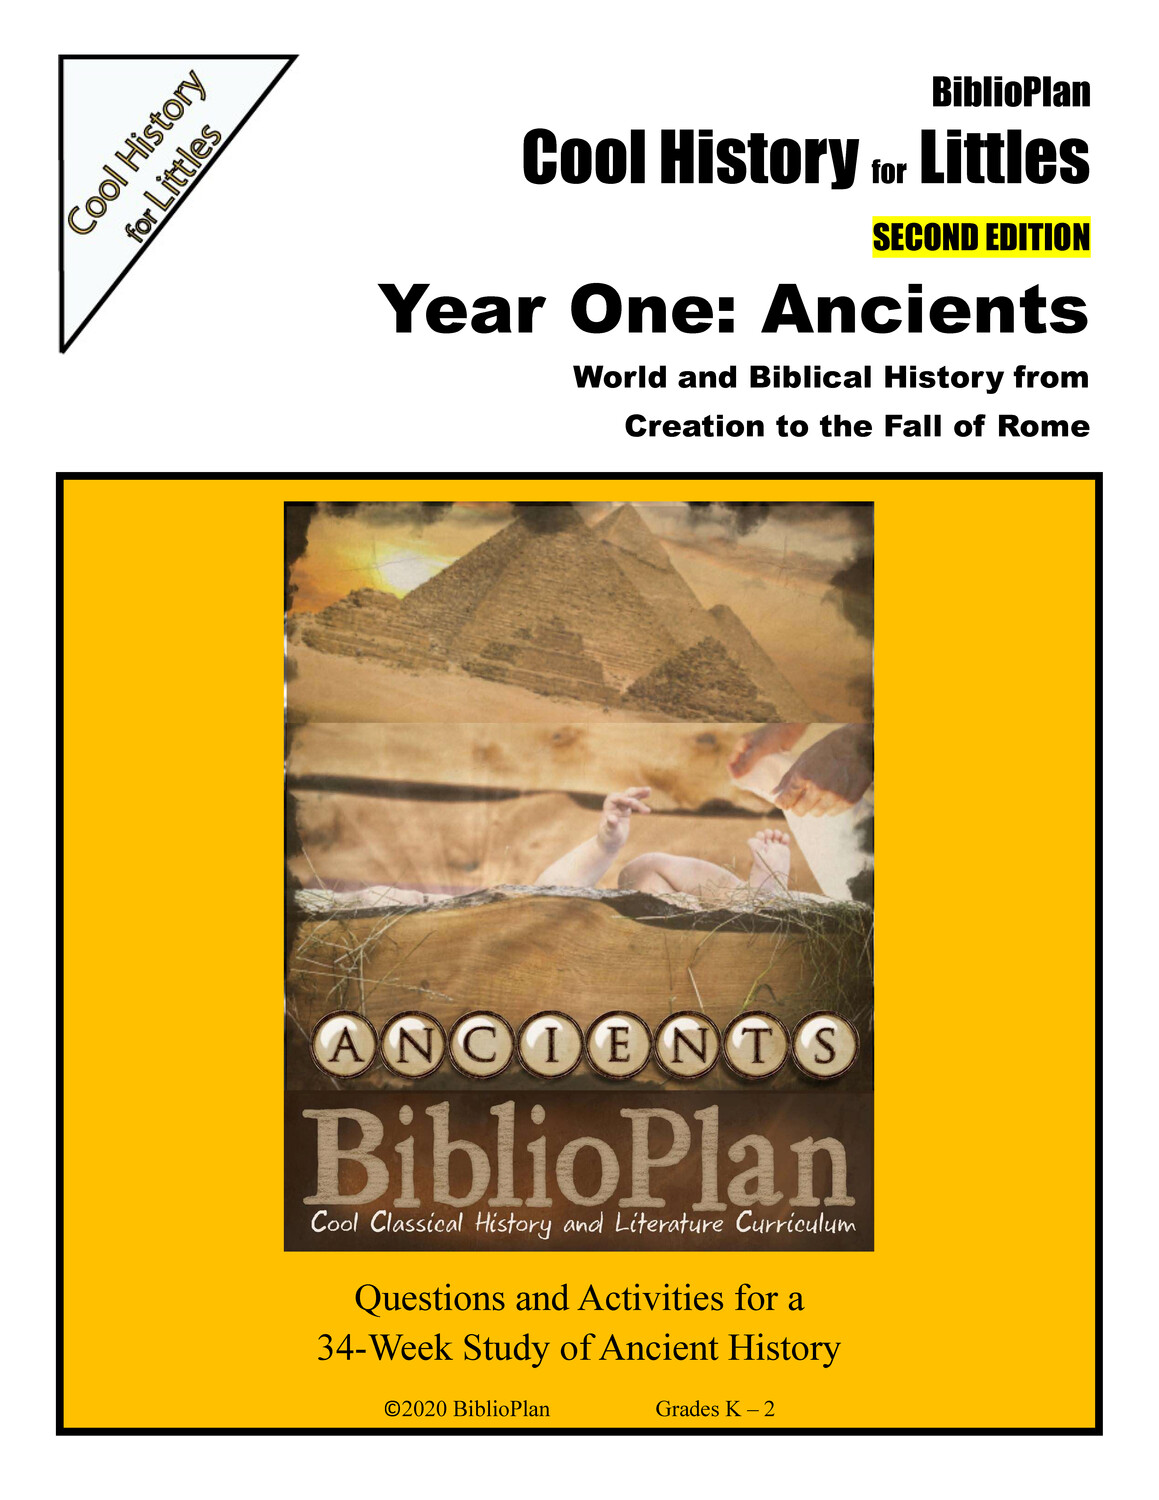 Ancients Cool History for Littles Hardcopy